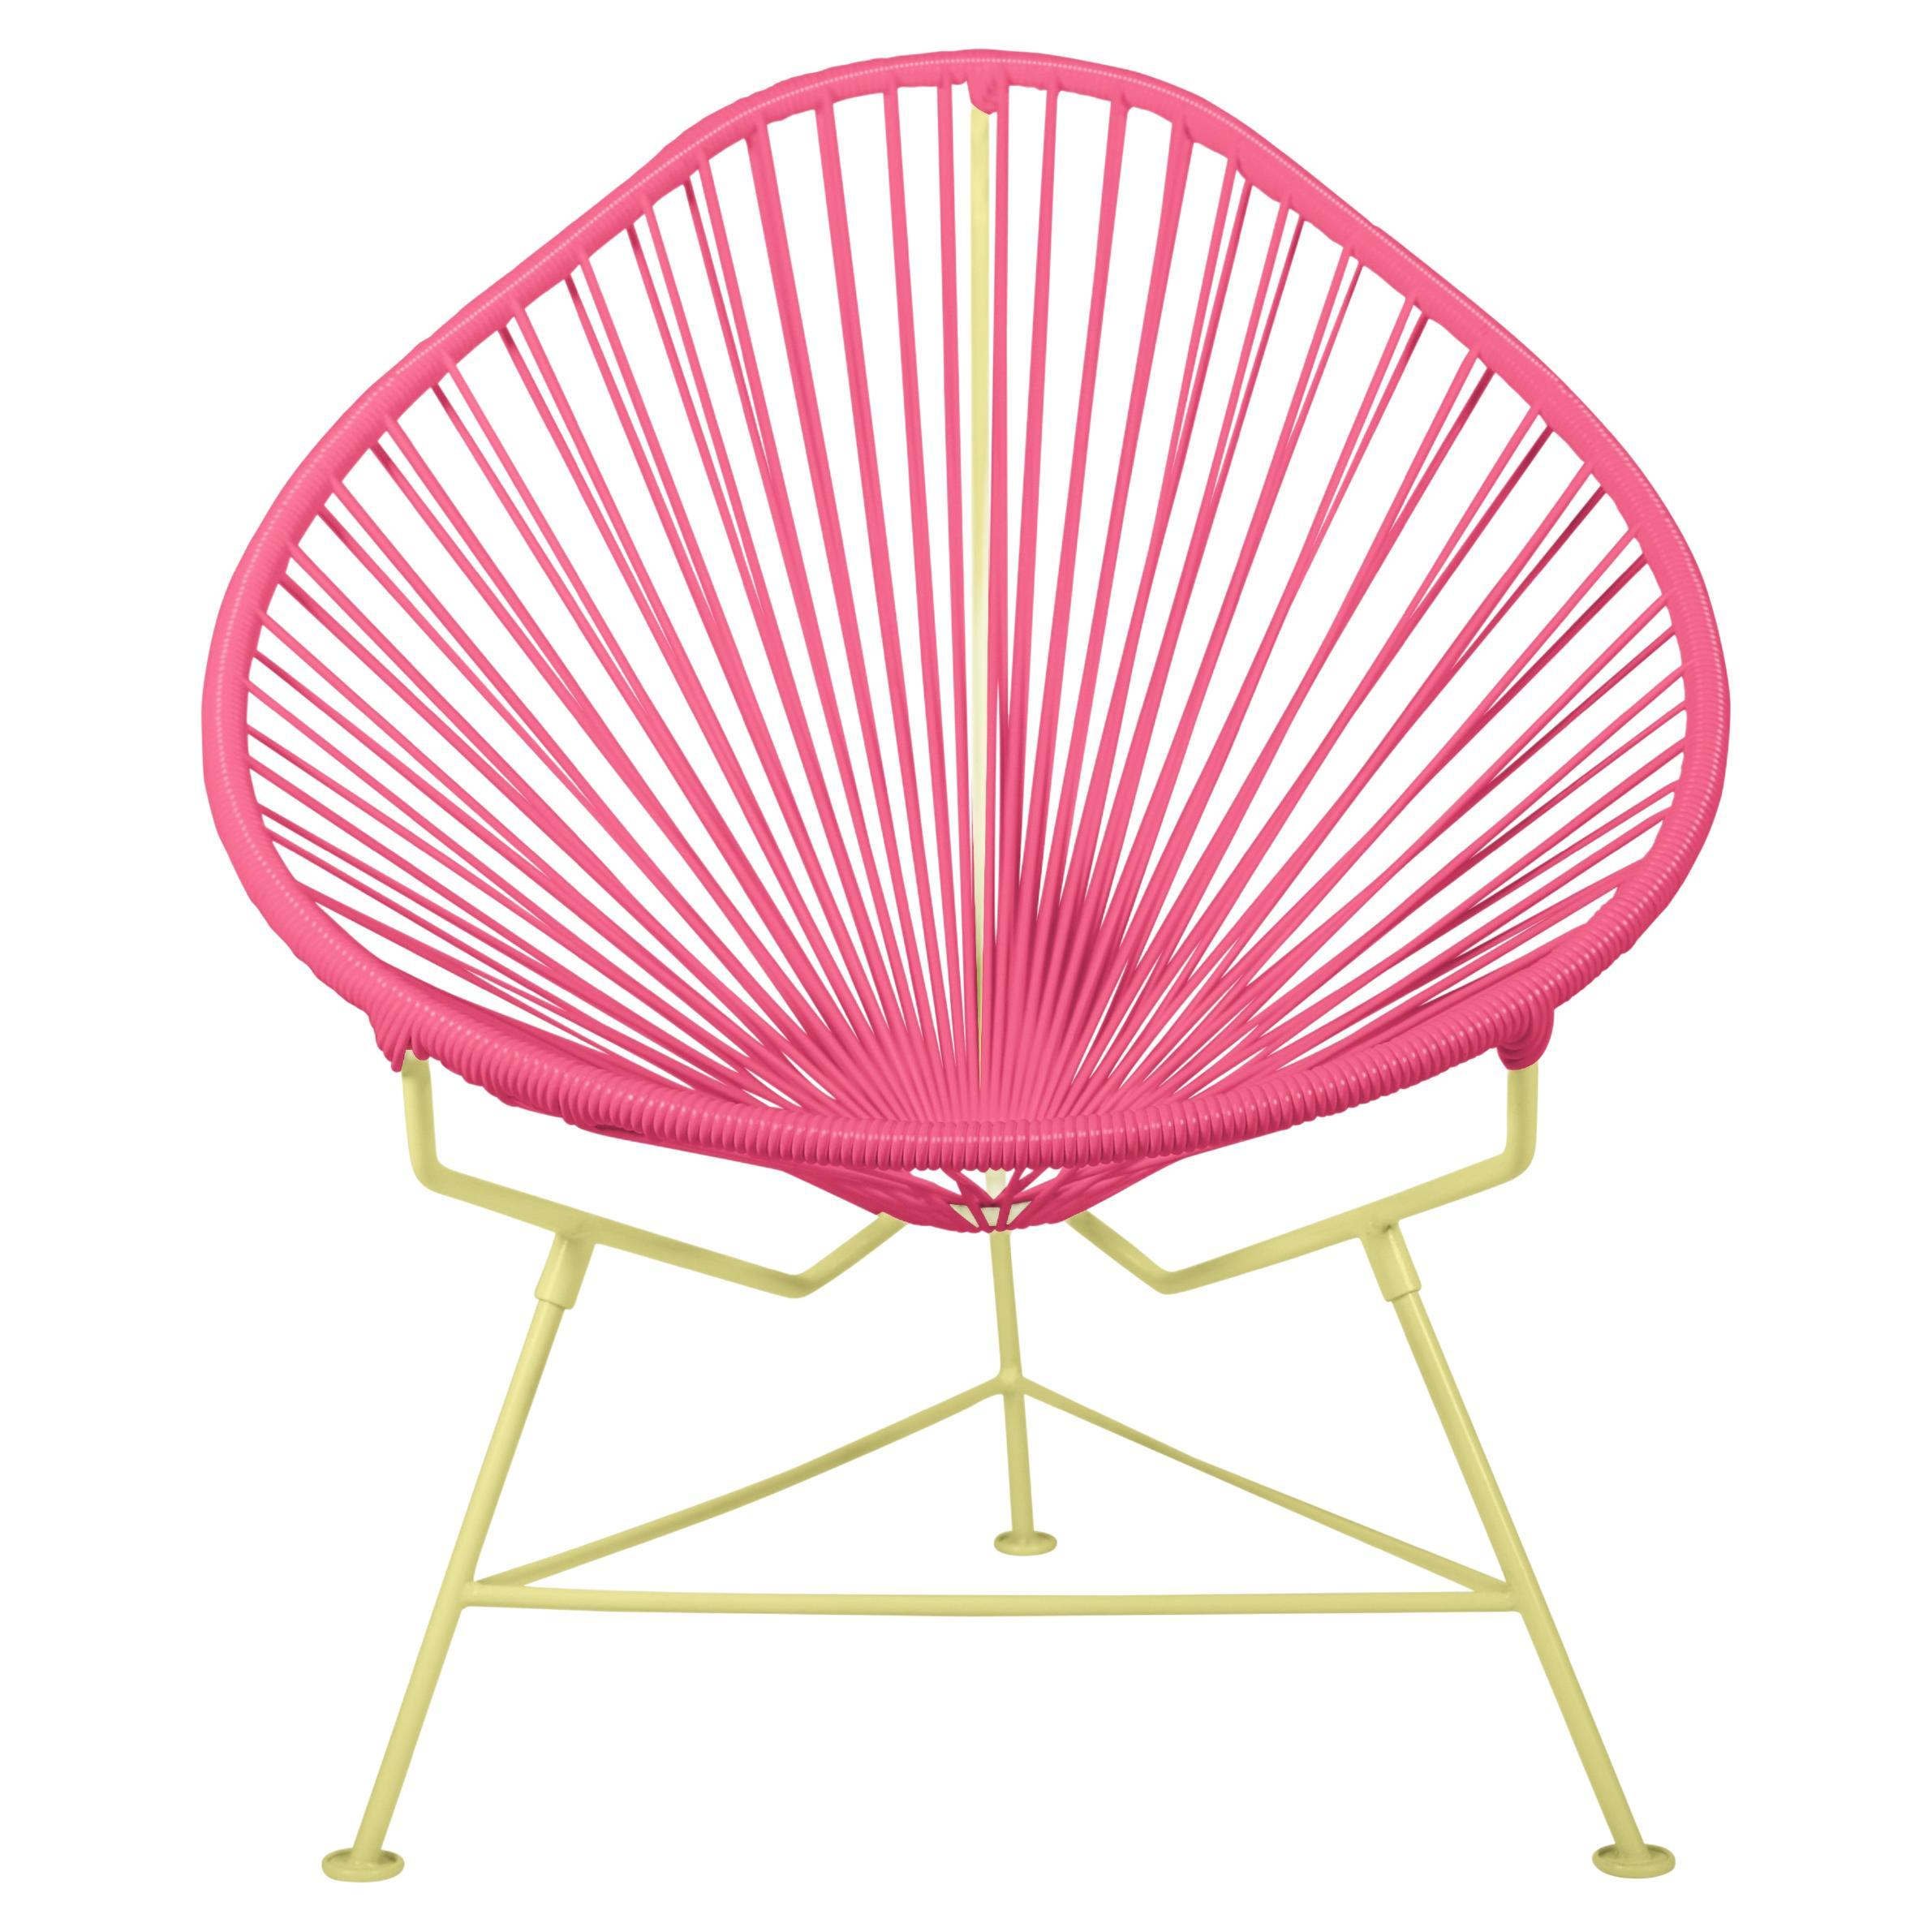 Innit Designs Acapulco Chair Pink Weave on Yellow Frame